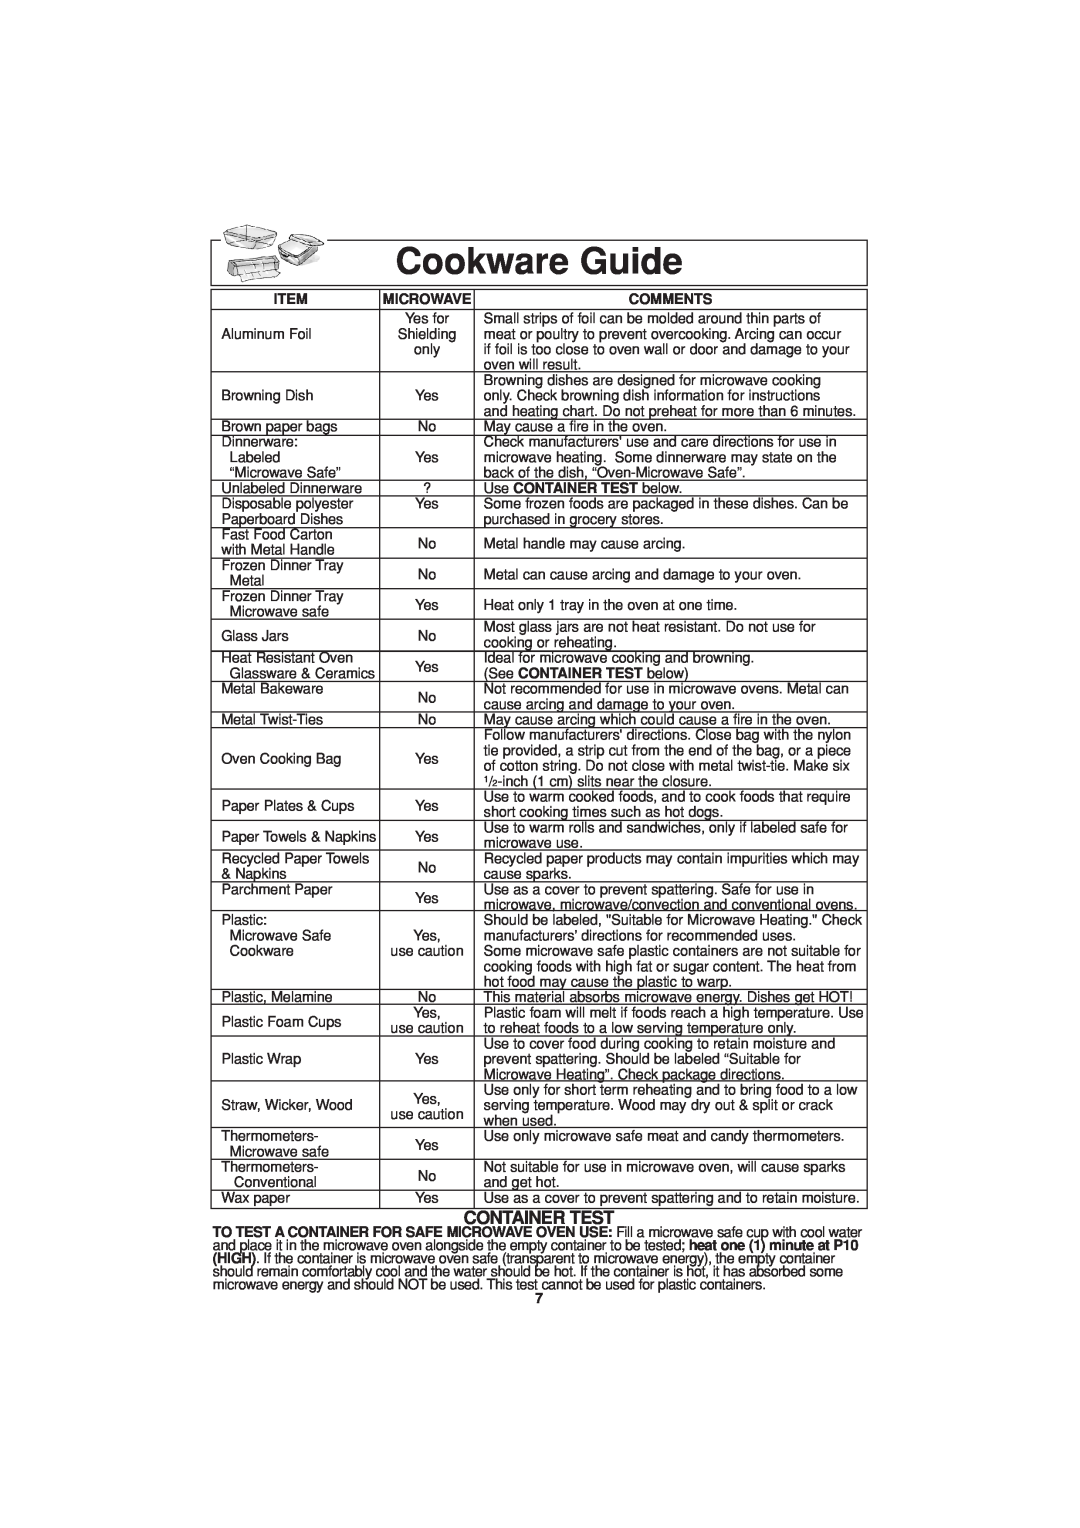 Panasonic NN-T694 operating instructions Cookware Guide, Container Test 